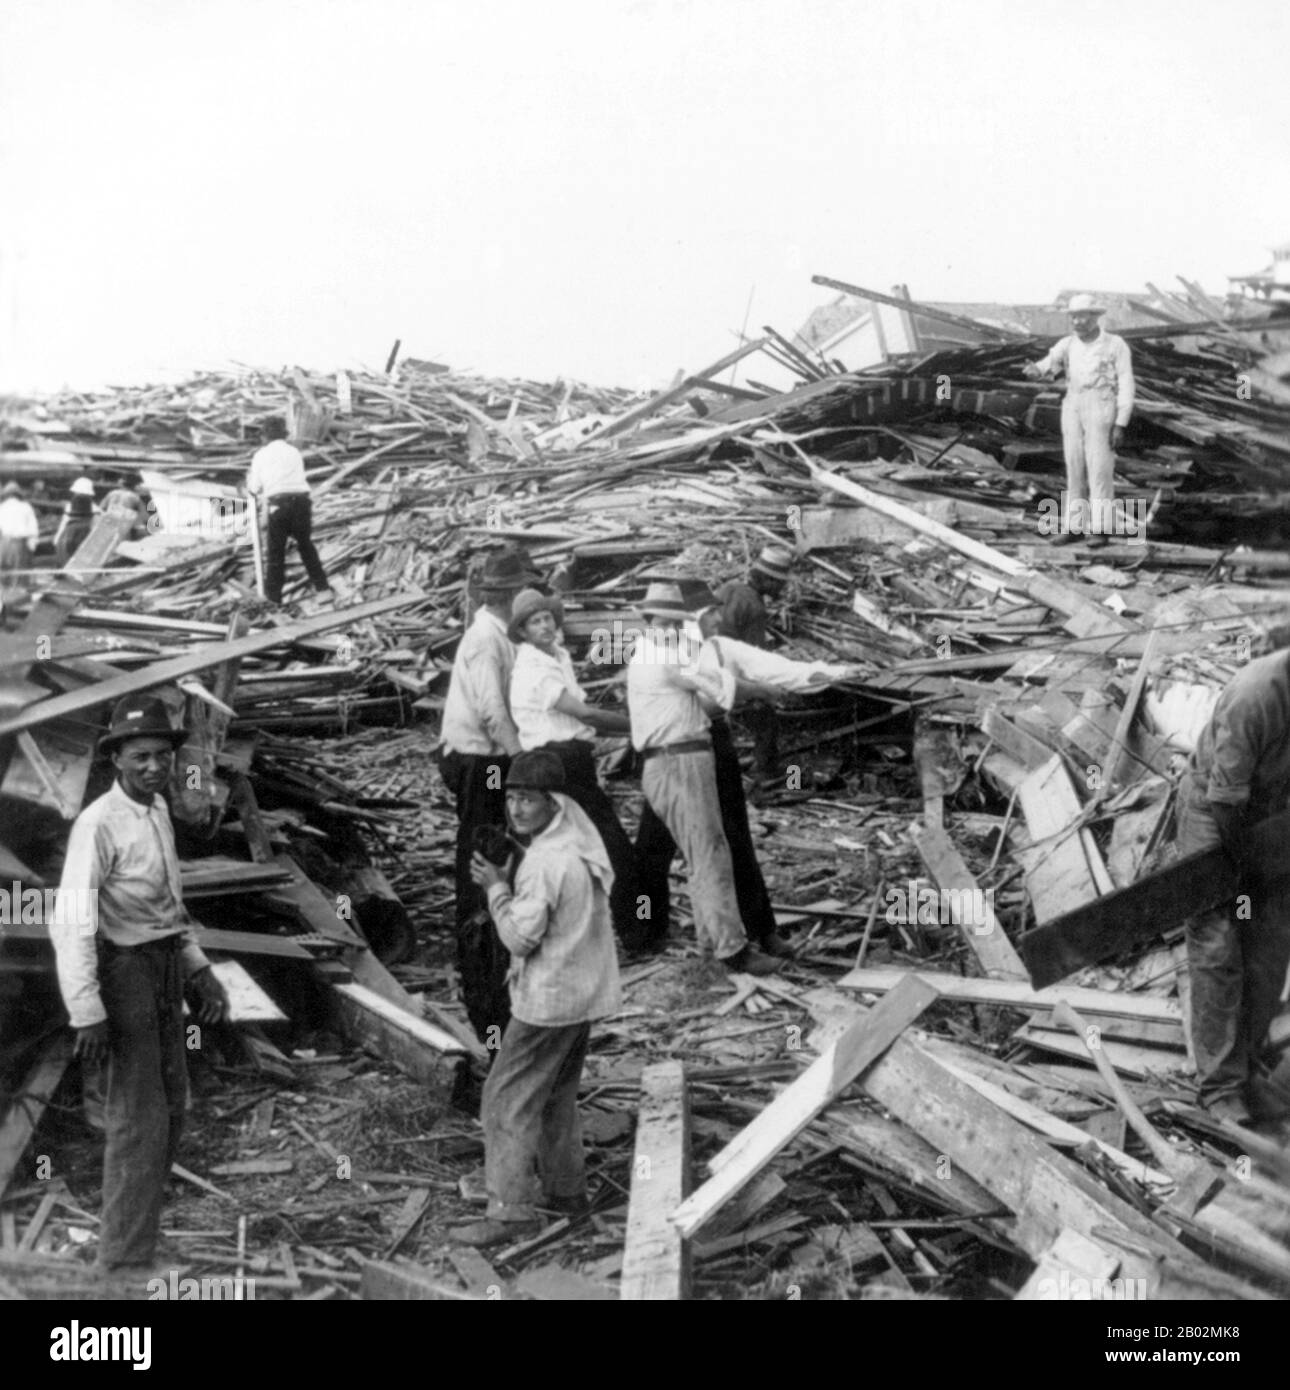 The Hurricane of 1900 made landfall on September 8, 1900, in the city of  Galveston, Texas, in the United States. It had estimated winds of 145 miles  per hour (233 km/h) at